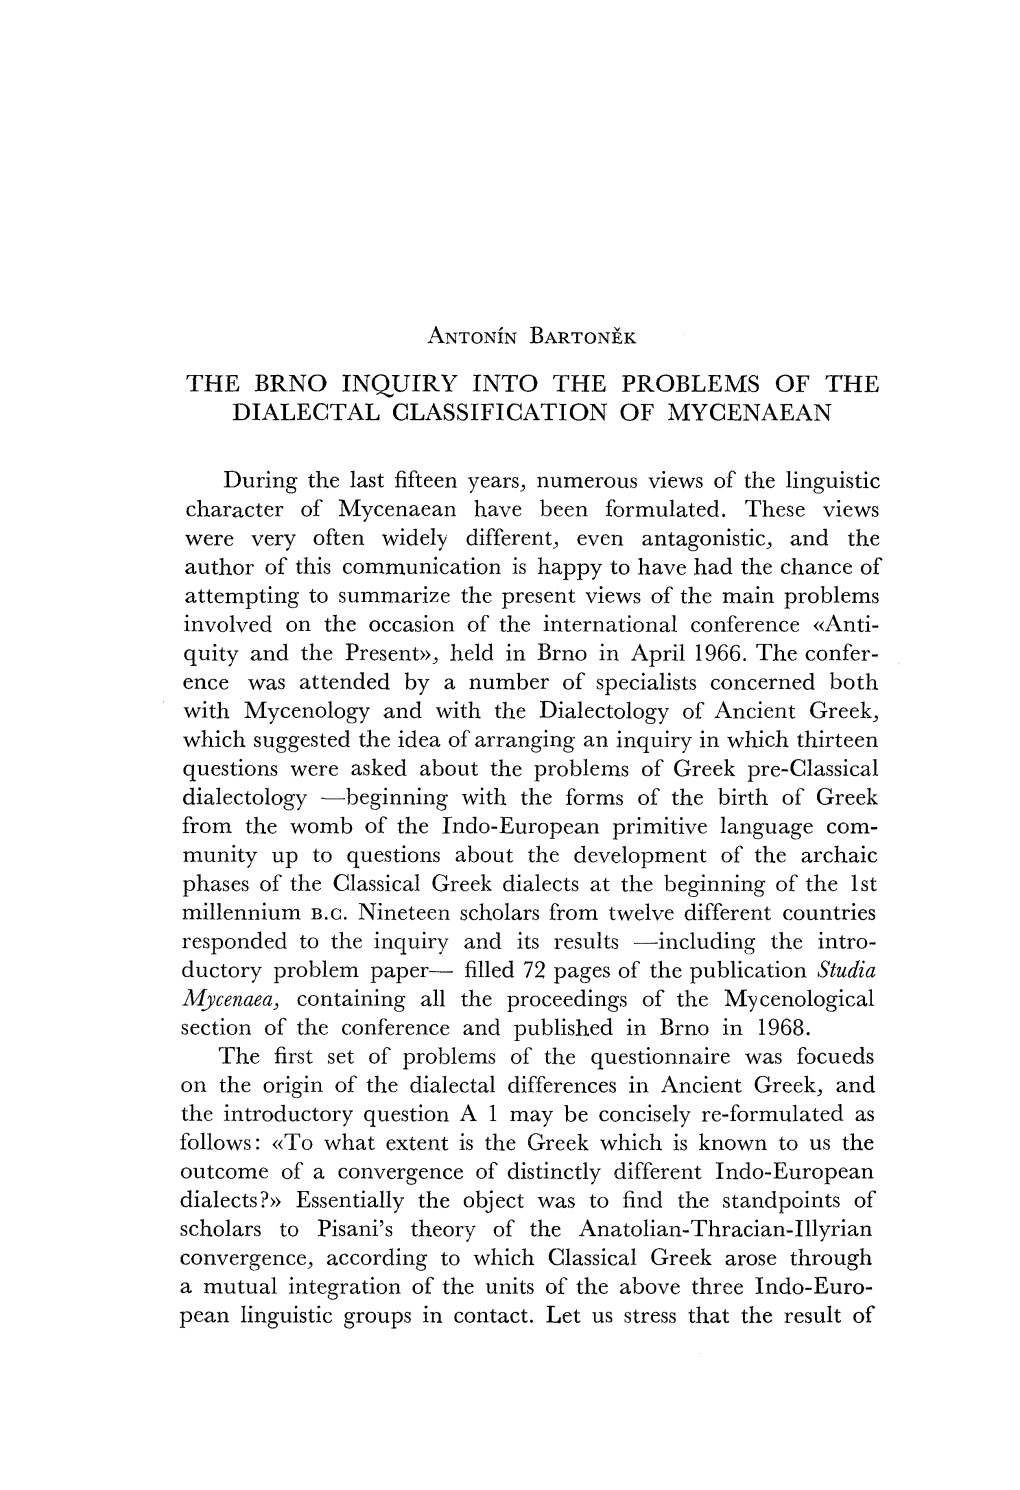 The Brno Inquiry Into the Problems of the Dialectal Classification of Mycenaean